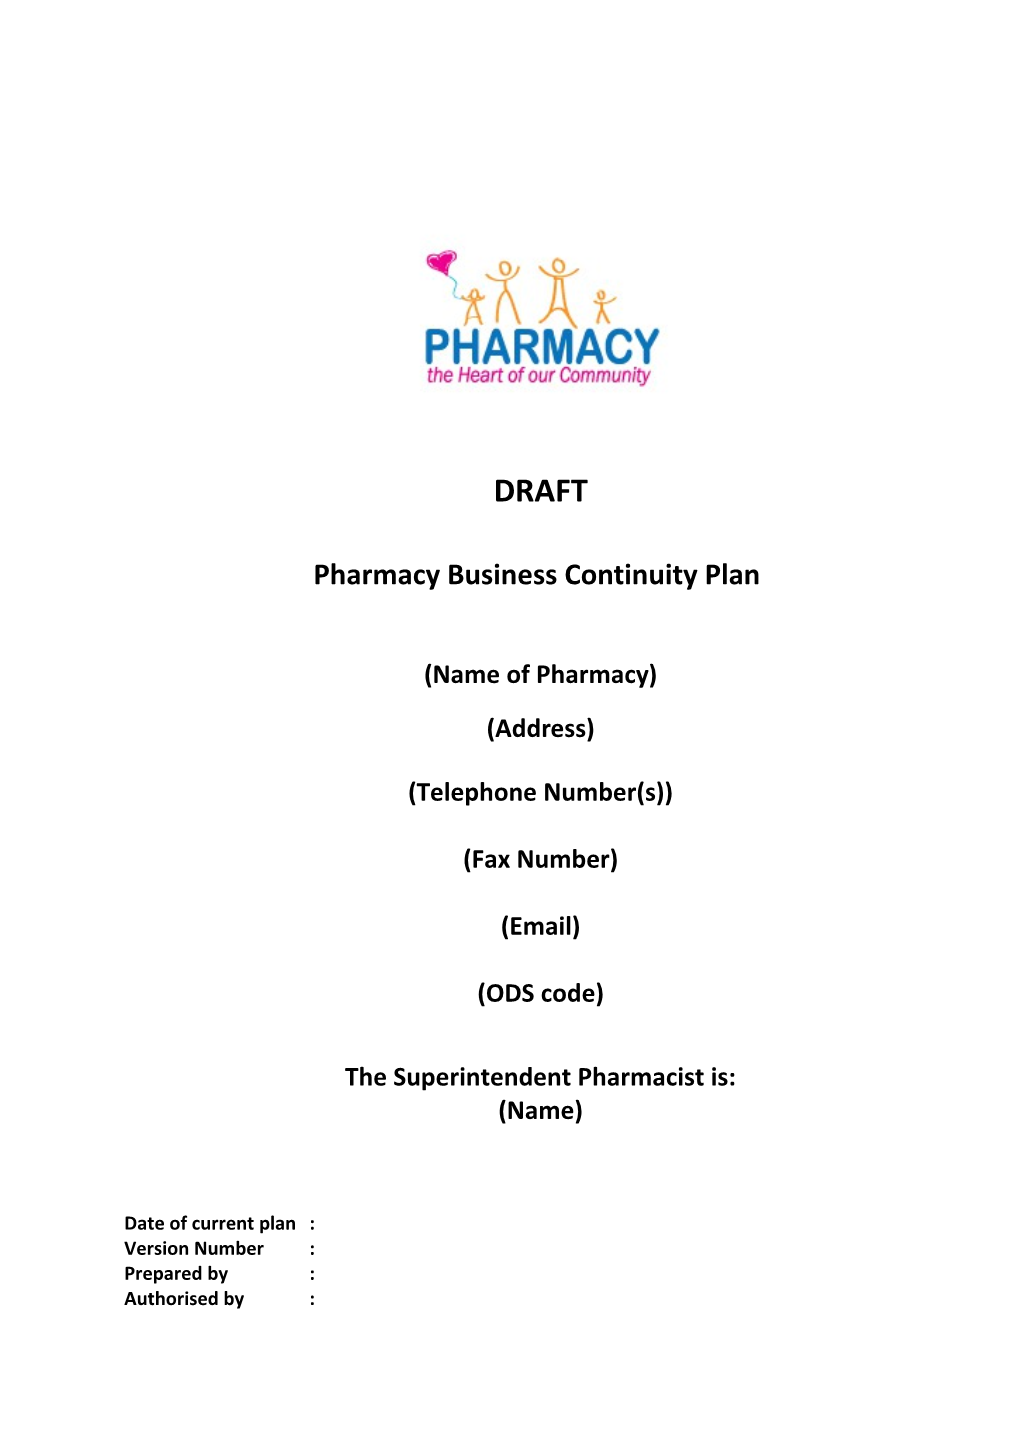 Pharmacy Business Continuity Plan